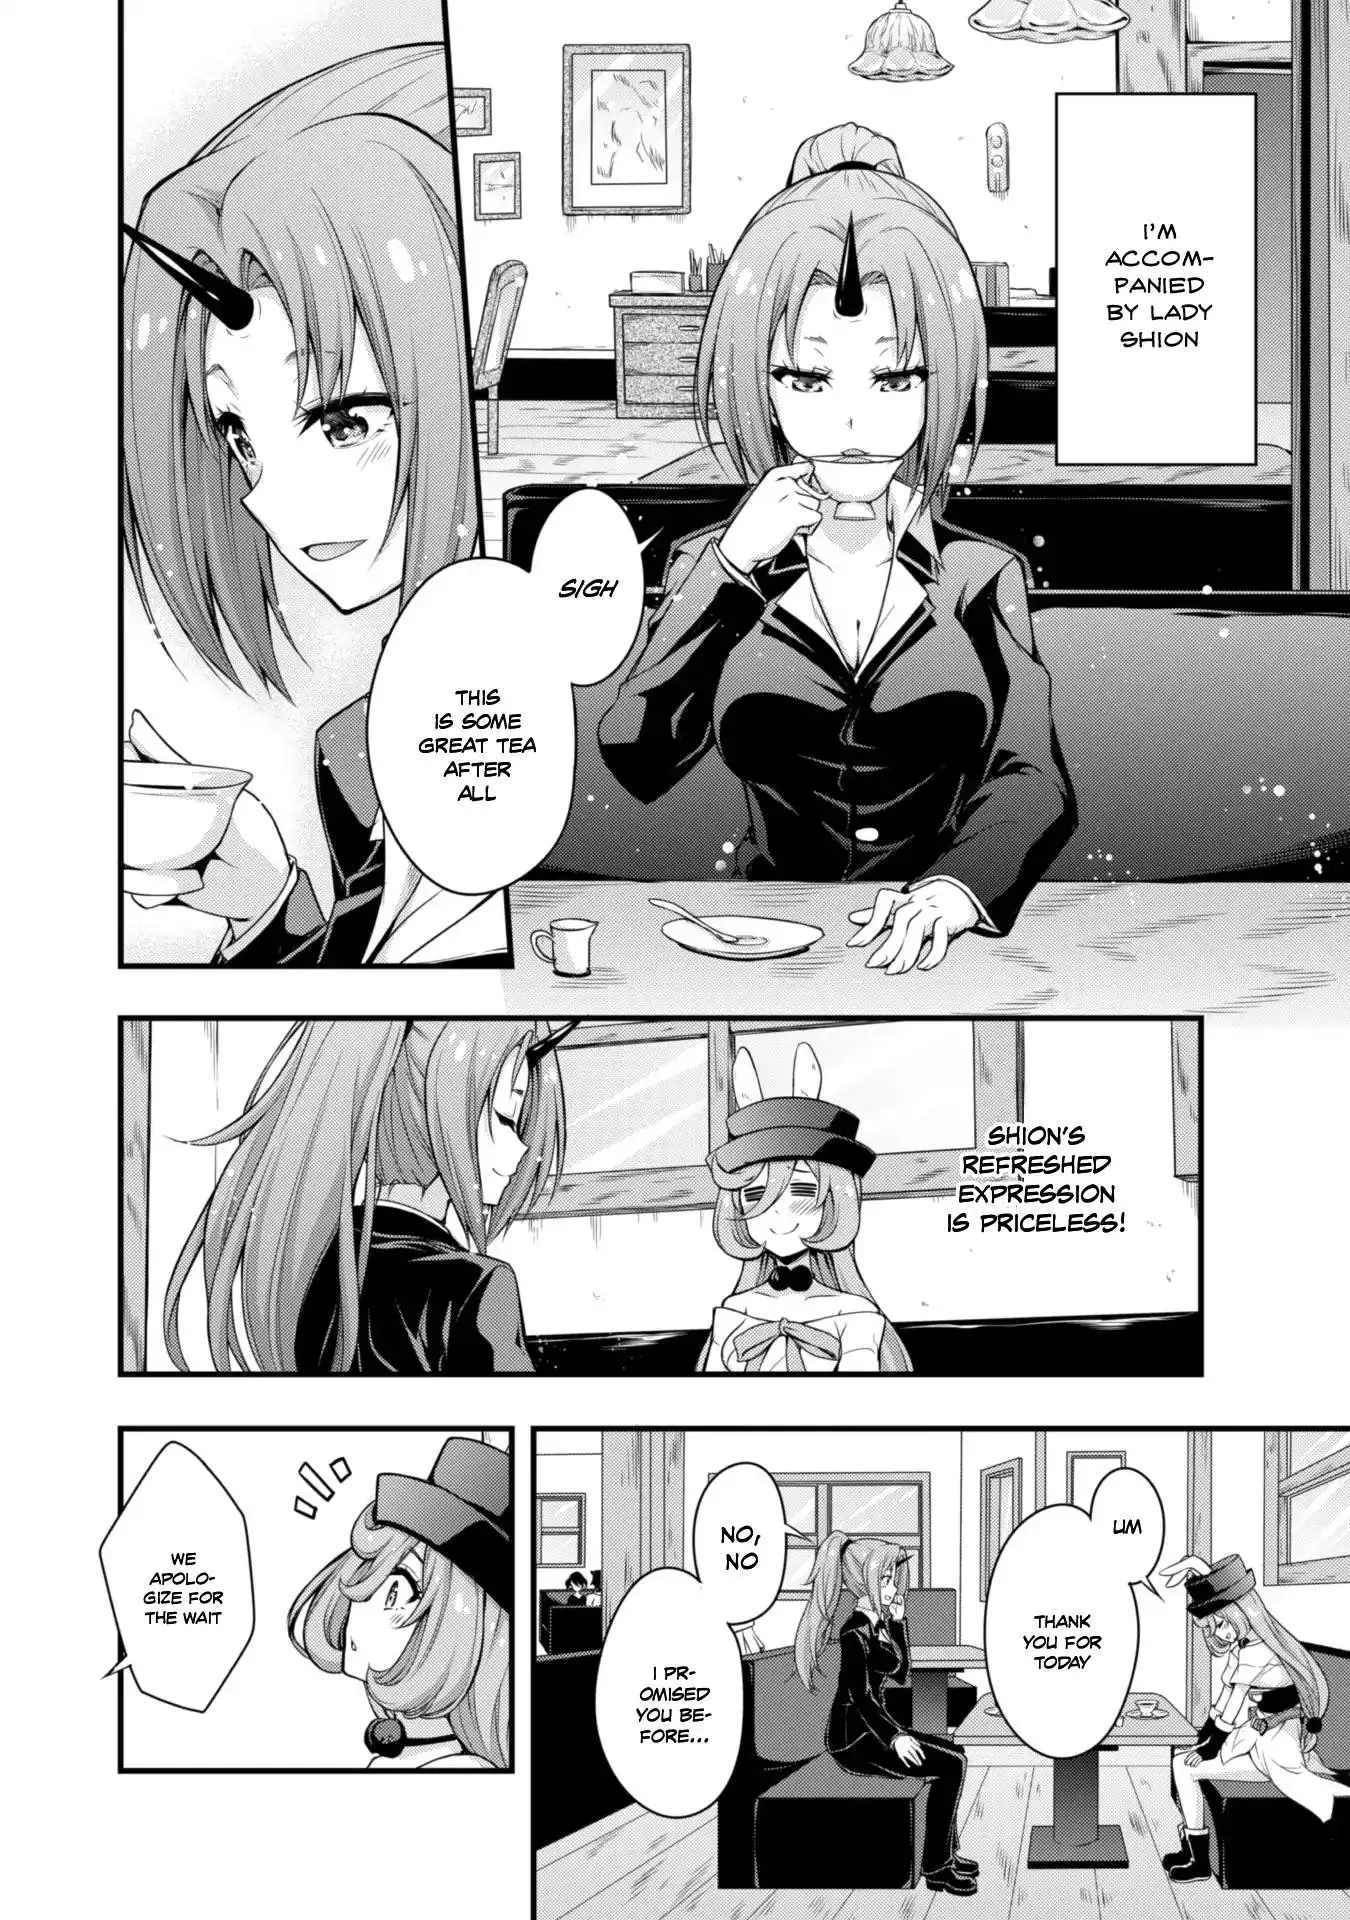 Tensei Shitara Slime Datta Ken: The Ways of Strolling in the Demon Country - 10 page 3